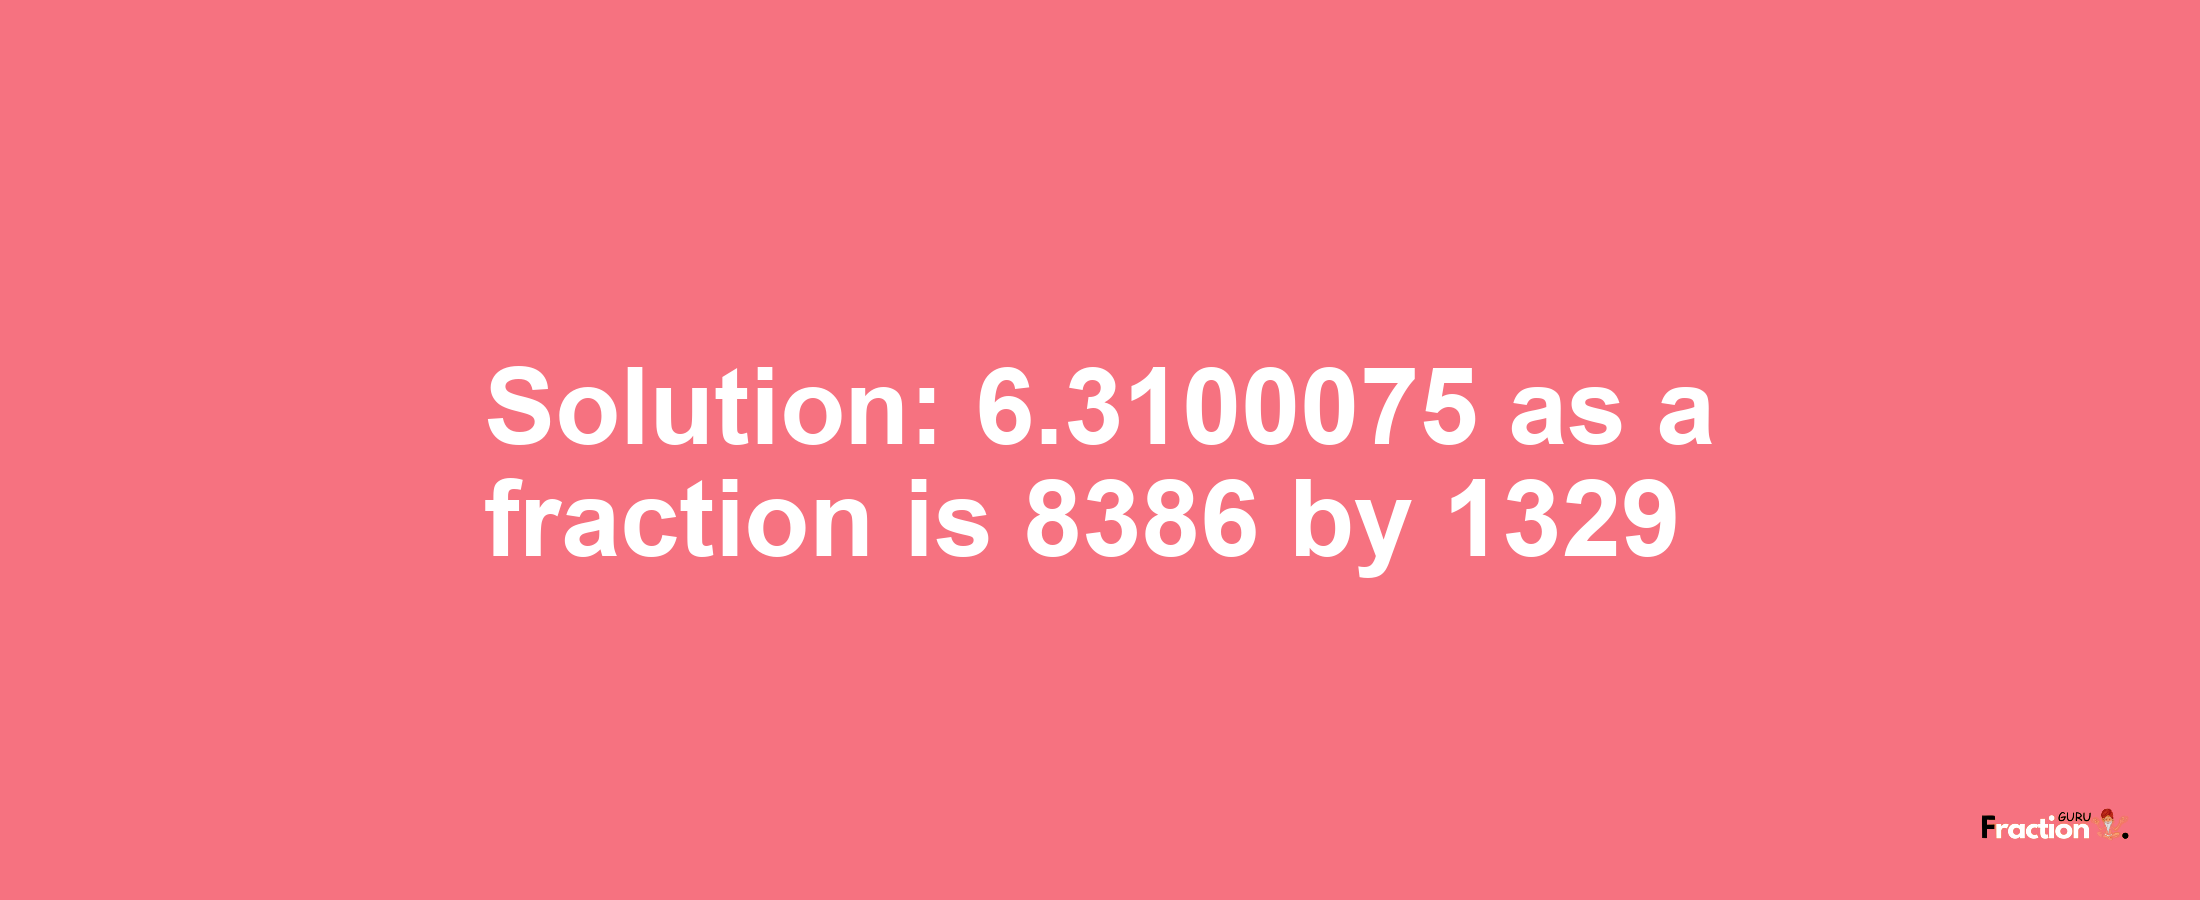 Solution:6.3100075 as a fraction is 8386/1329